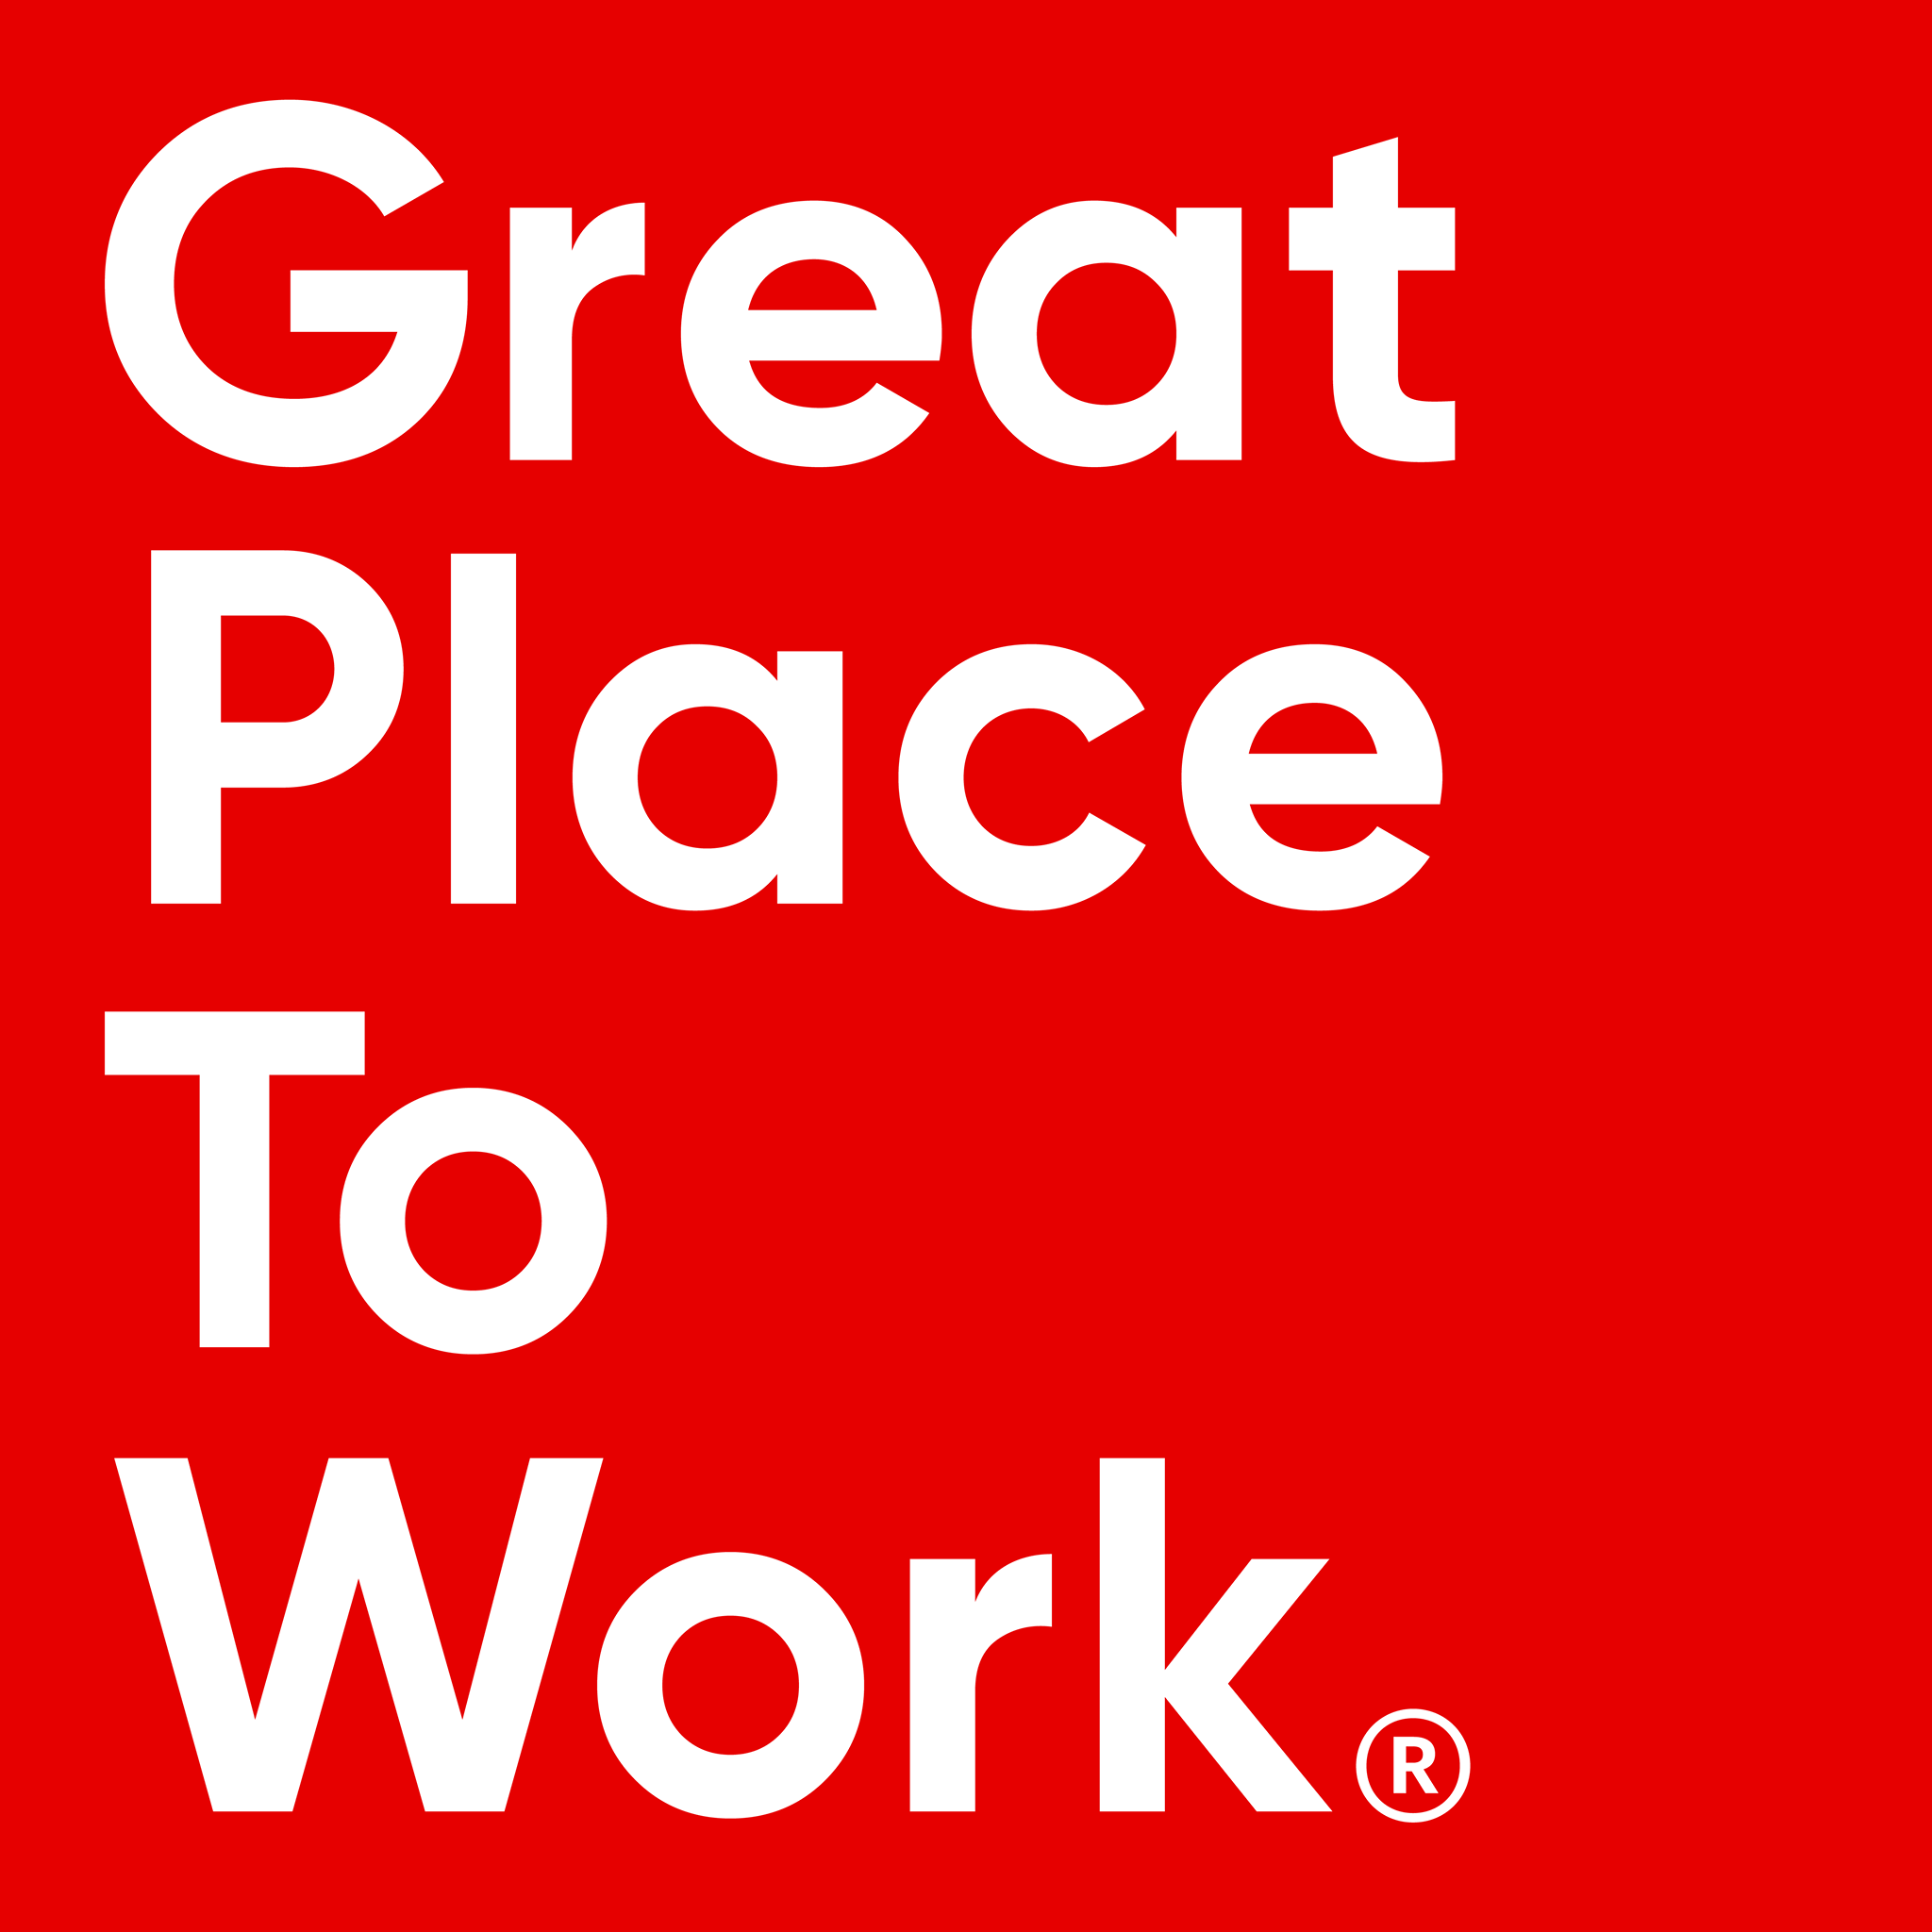 Great Place to Work Brasil